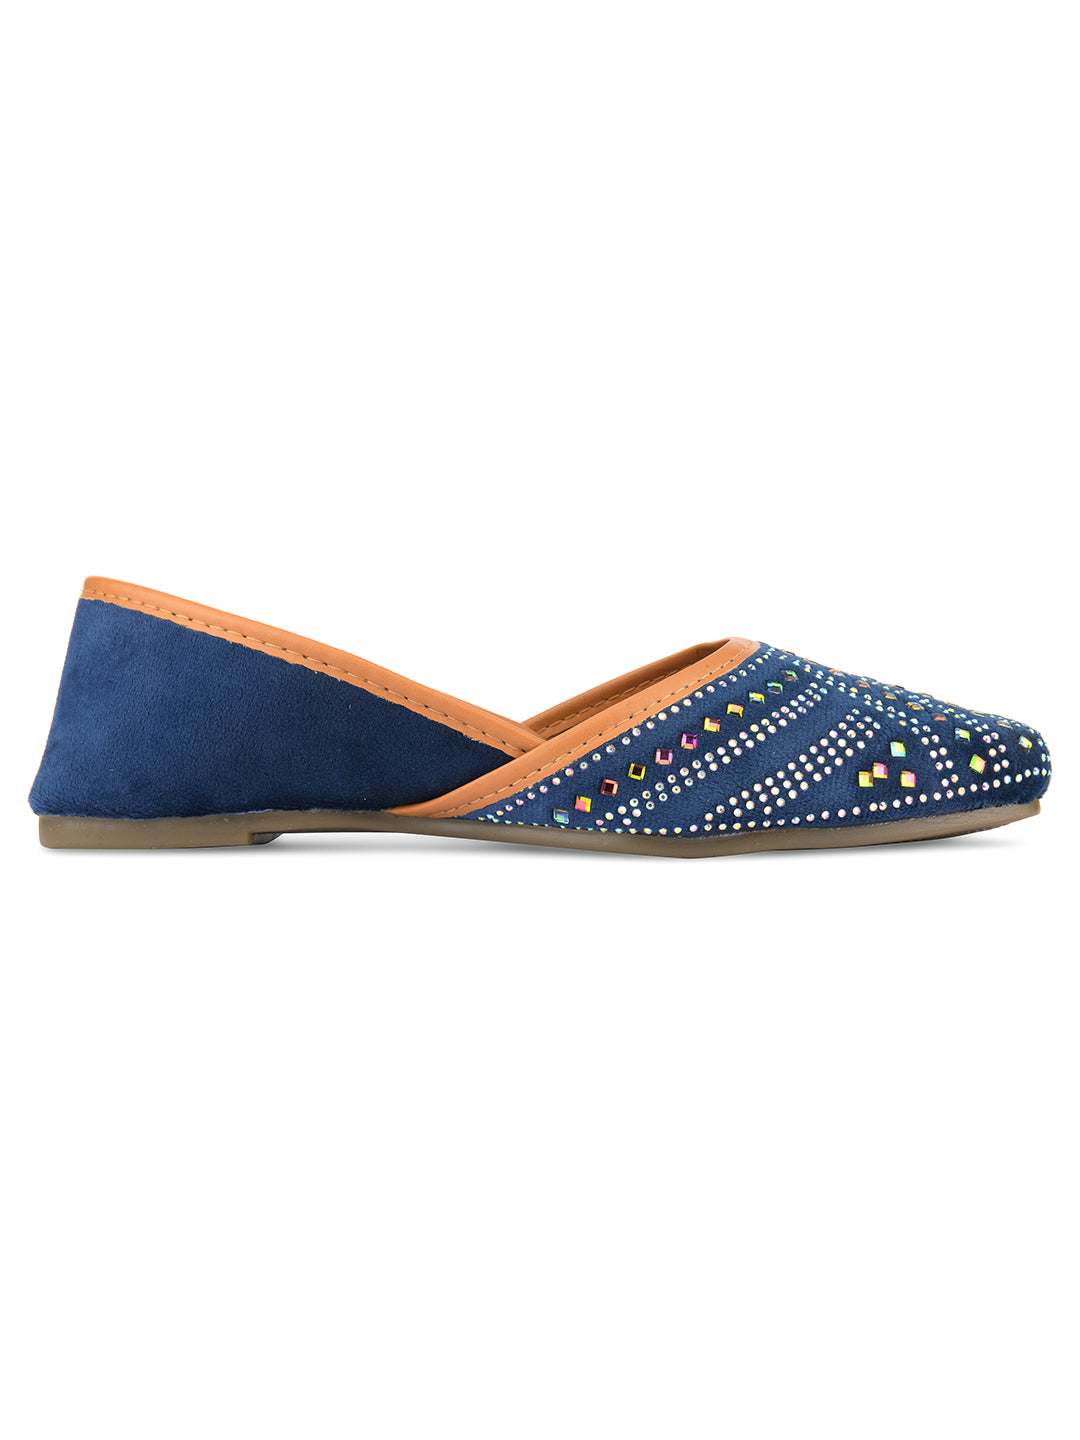 Women's Blue Handcrafted Stone Work  Indian Ethnic Comfort Footwear - Desi Colour